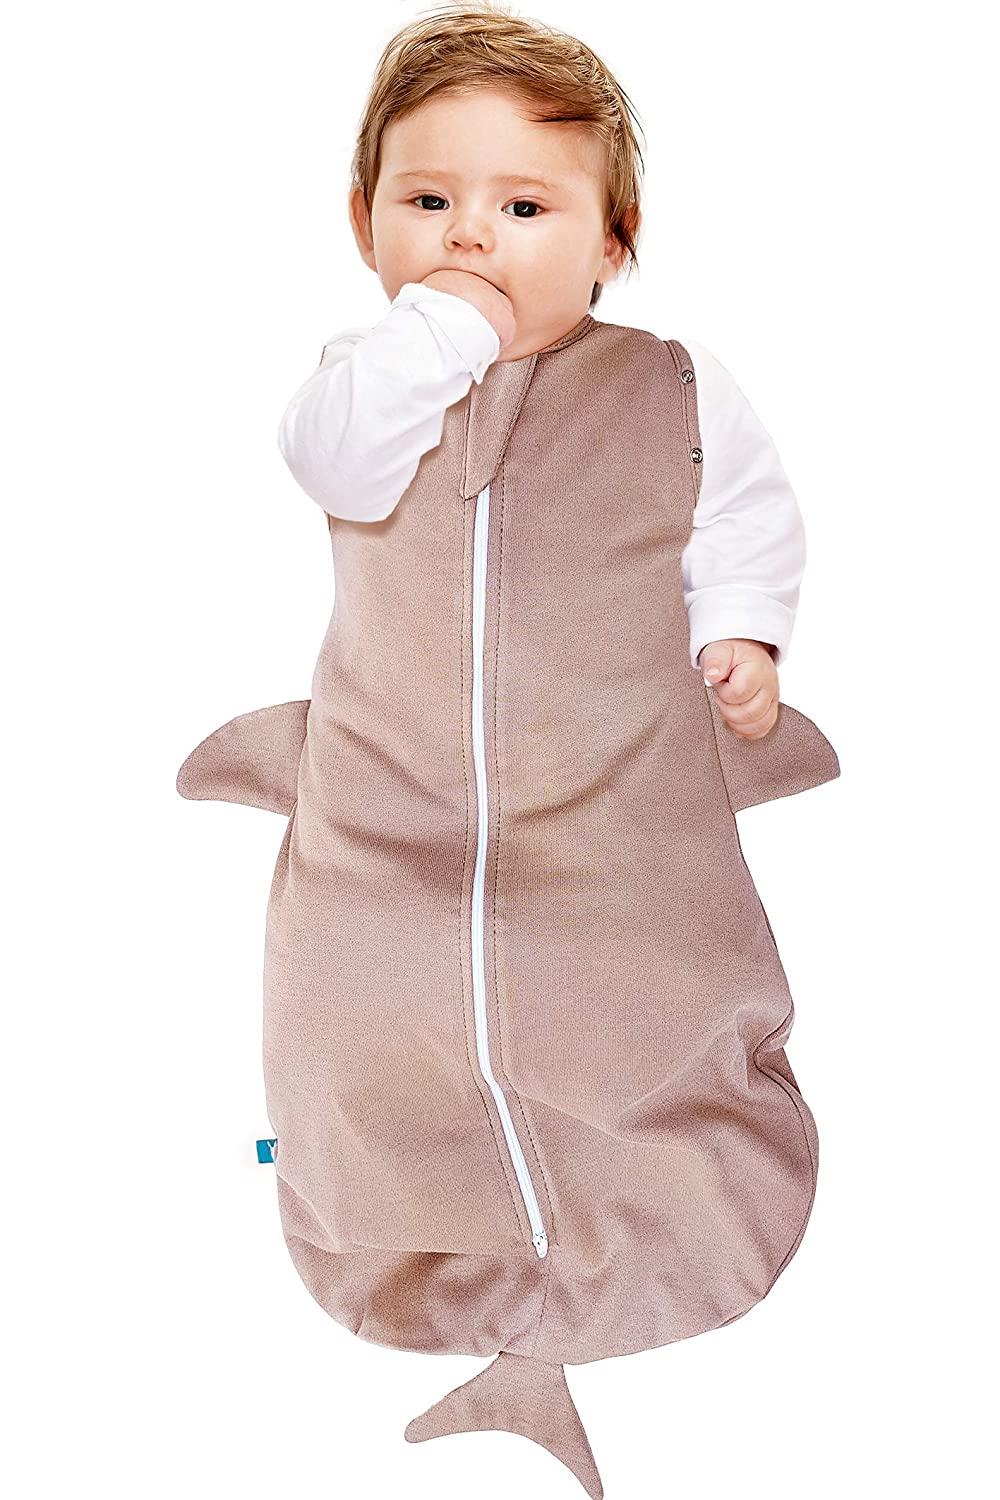 Wallaboo Baby sleeping bag, the ideal first pack for your little ones, 100% cotton, great for babies who often wake up, also suitable for all baby seats, dimensions S: 0-3 months, 3-6 kg, colour: taupe